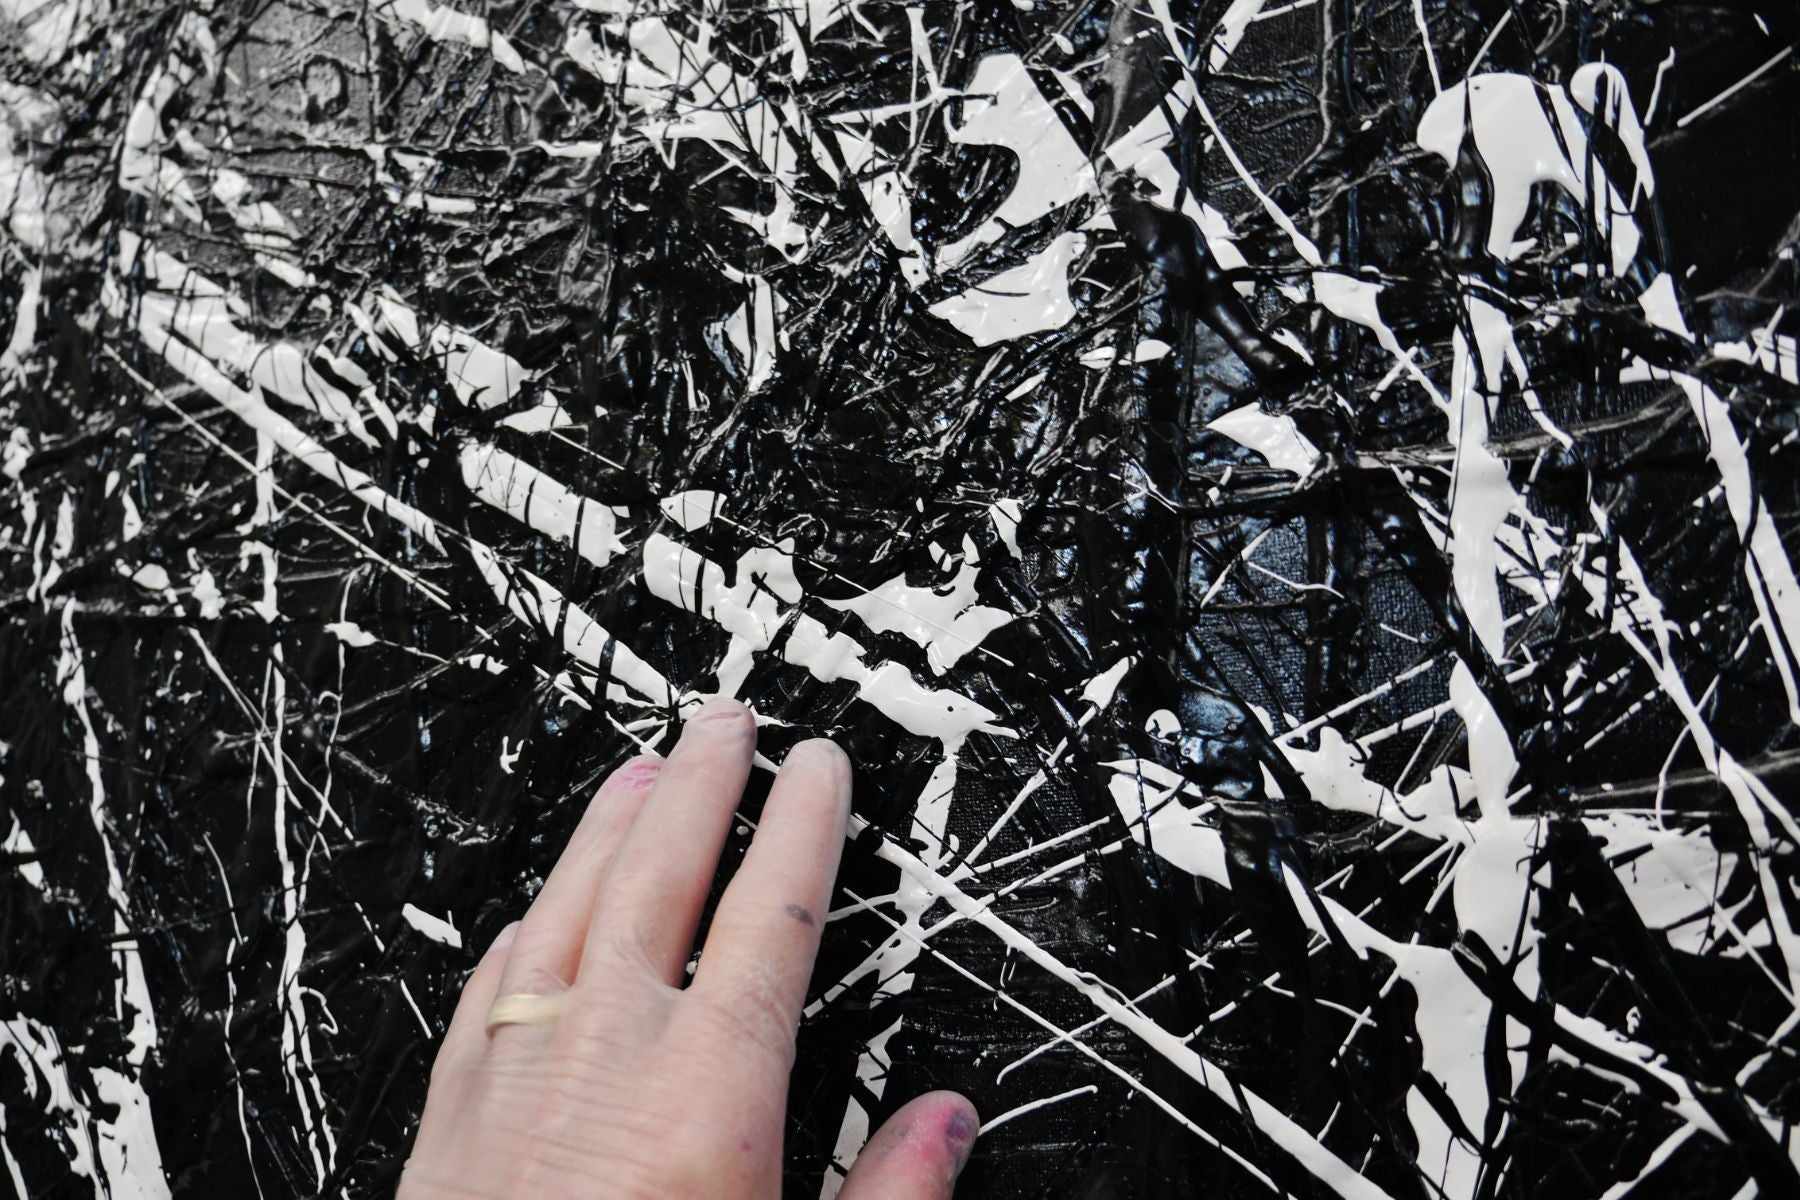 Scattergories 240cm x 120cm White Black Textured Abstract Painting (SOLD)